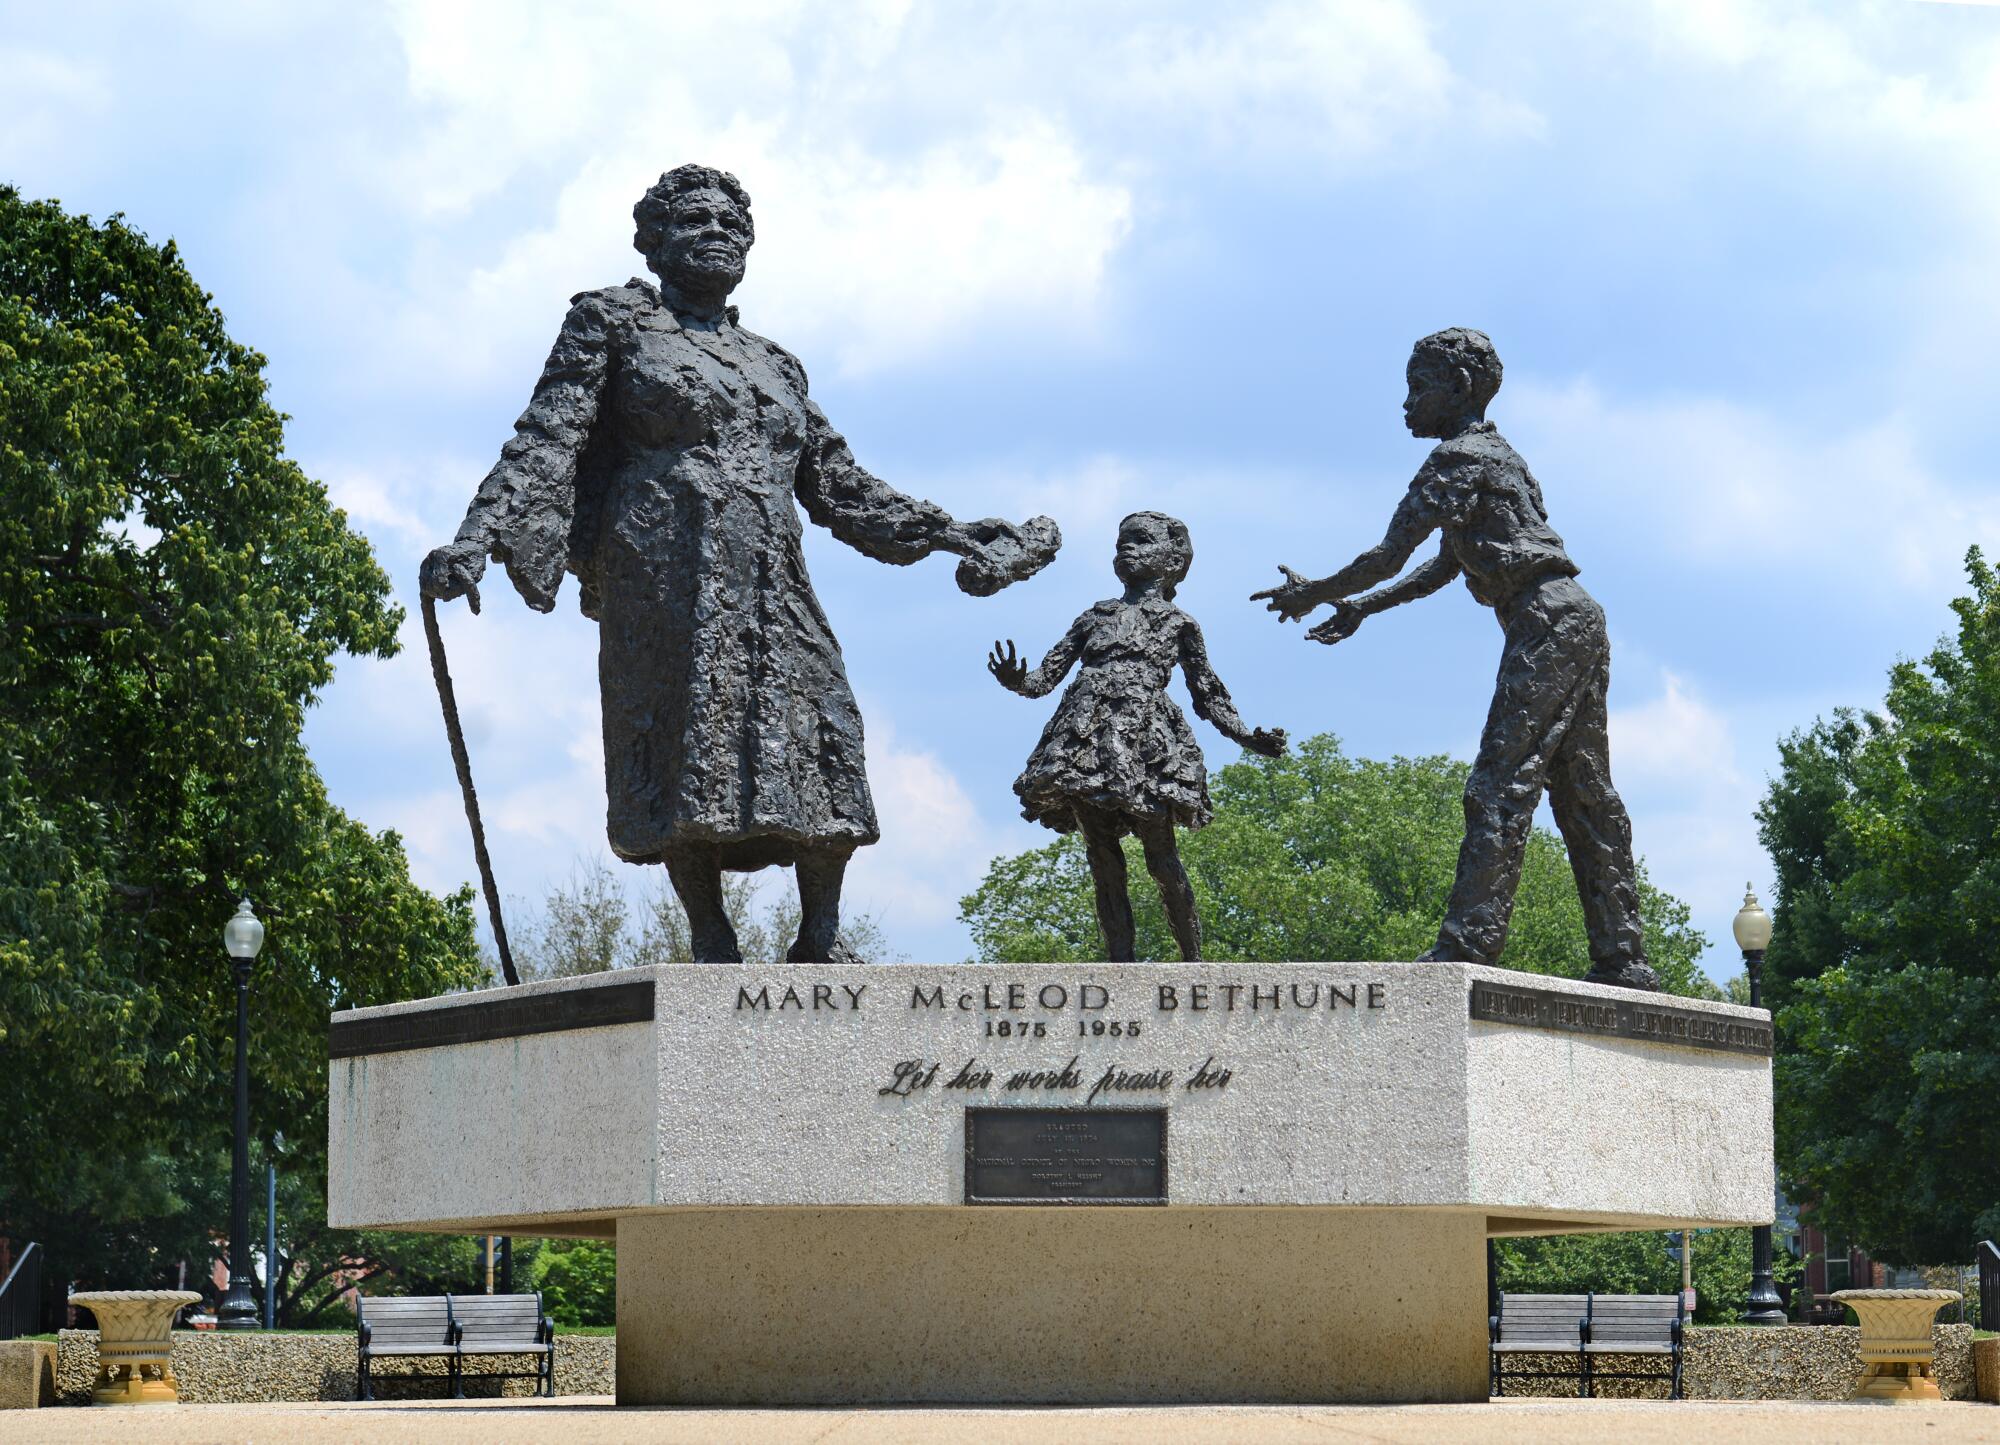 A bronze sculpture shows Black activist Mary McLeod Bethune passing a roll of papers to two young children.